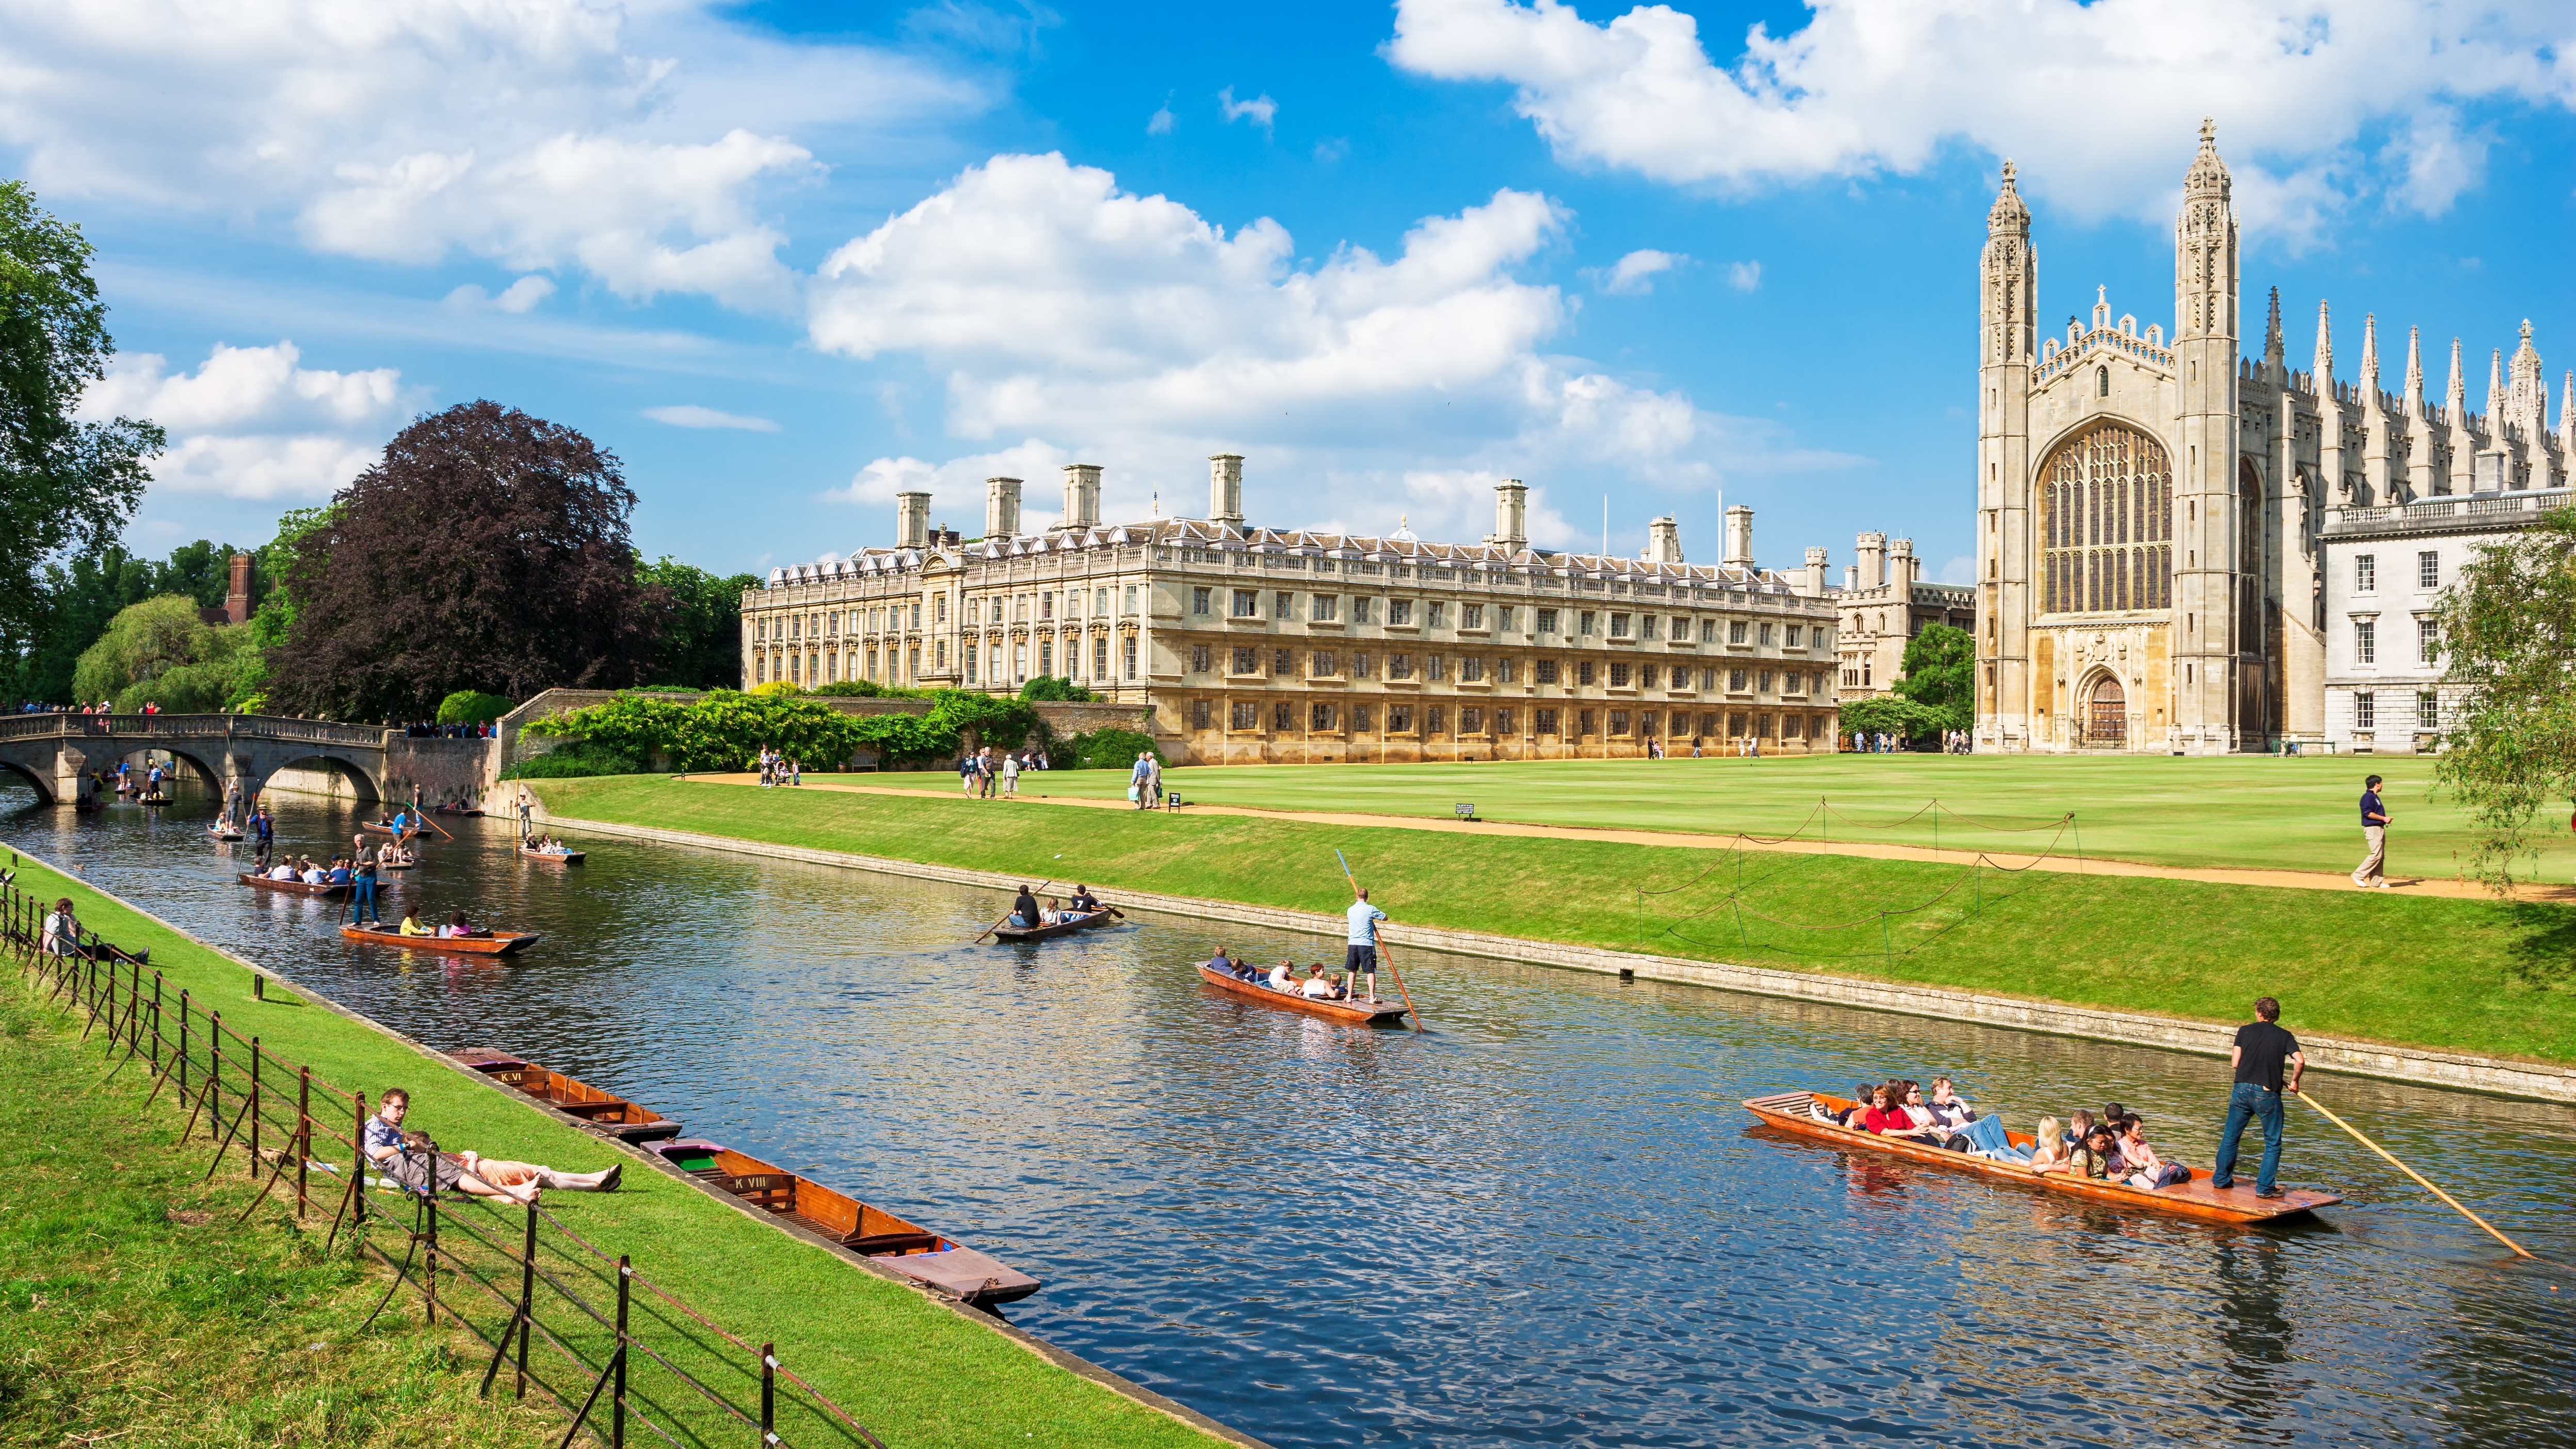 Cambridge University uses “contextual data” before inviting applicants to interview